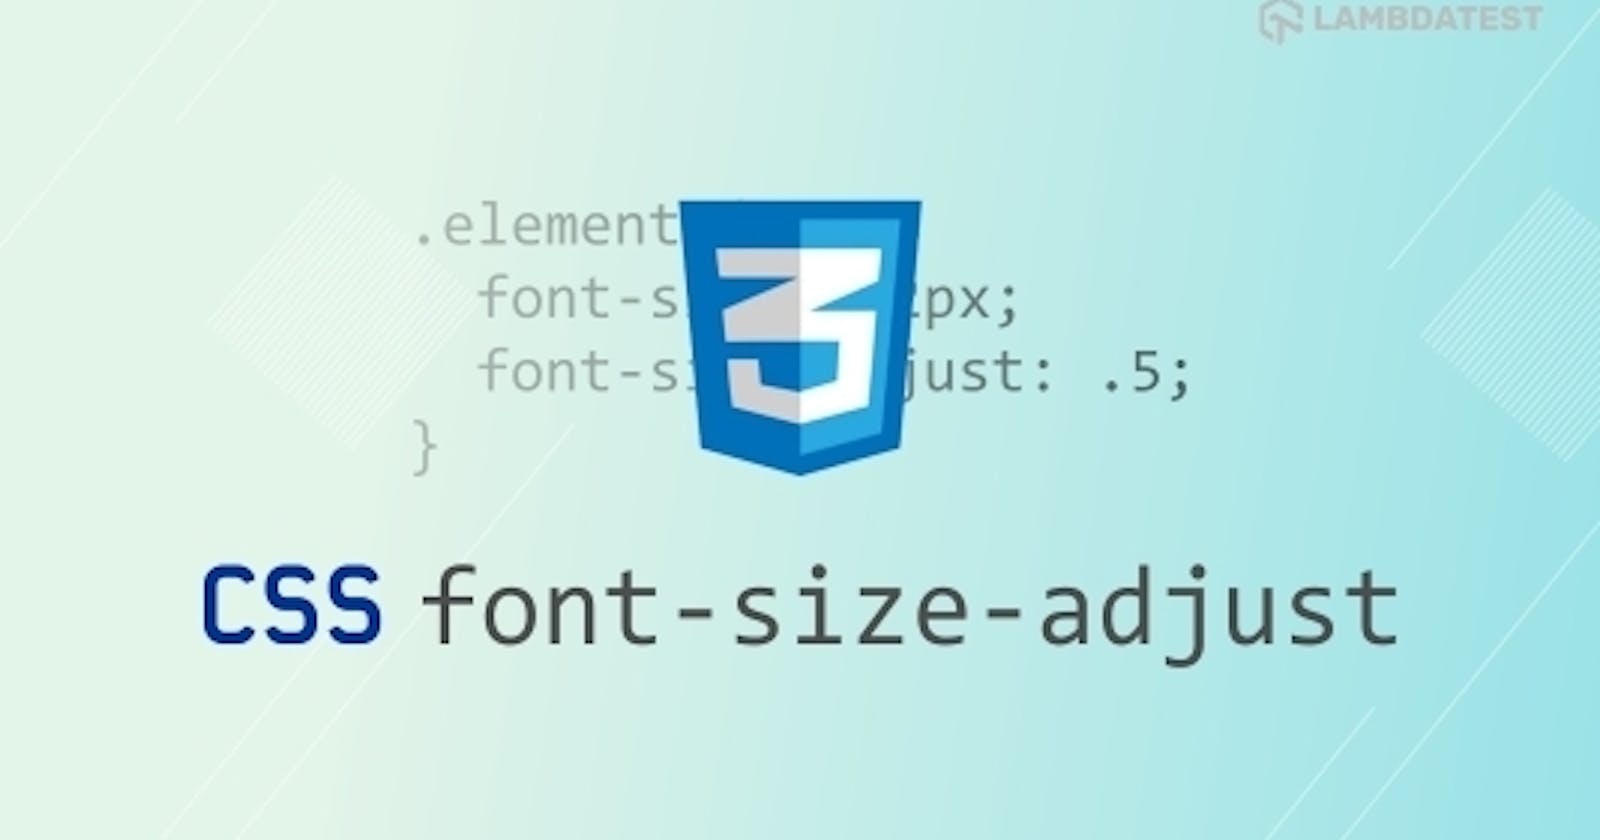 How To Auto Adjust Your Font Size With CSS font-size-adjust?